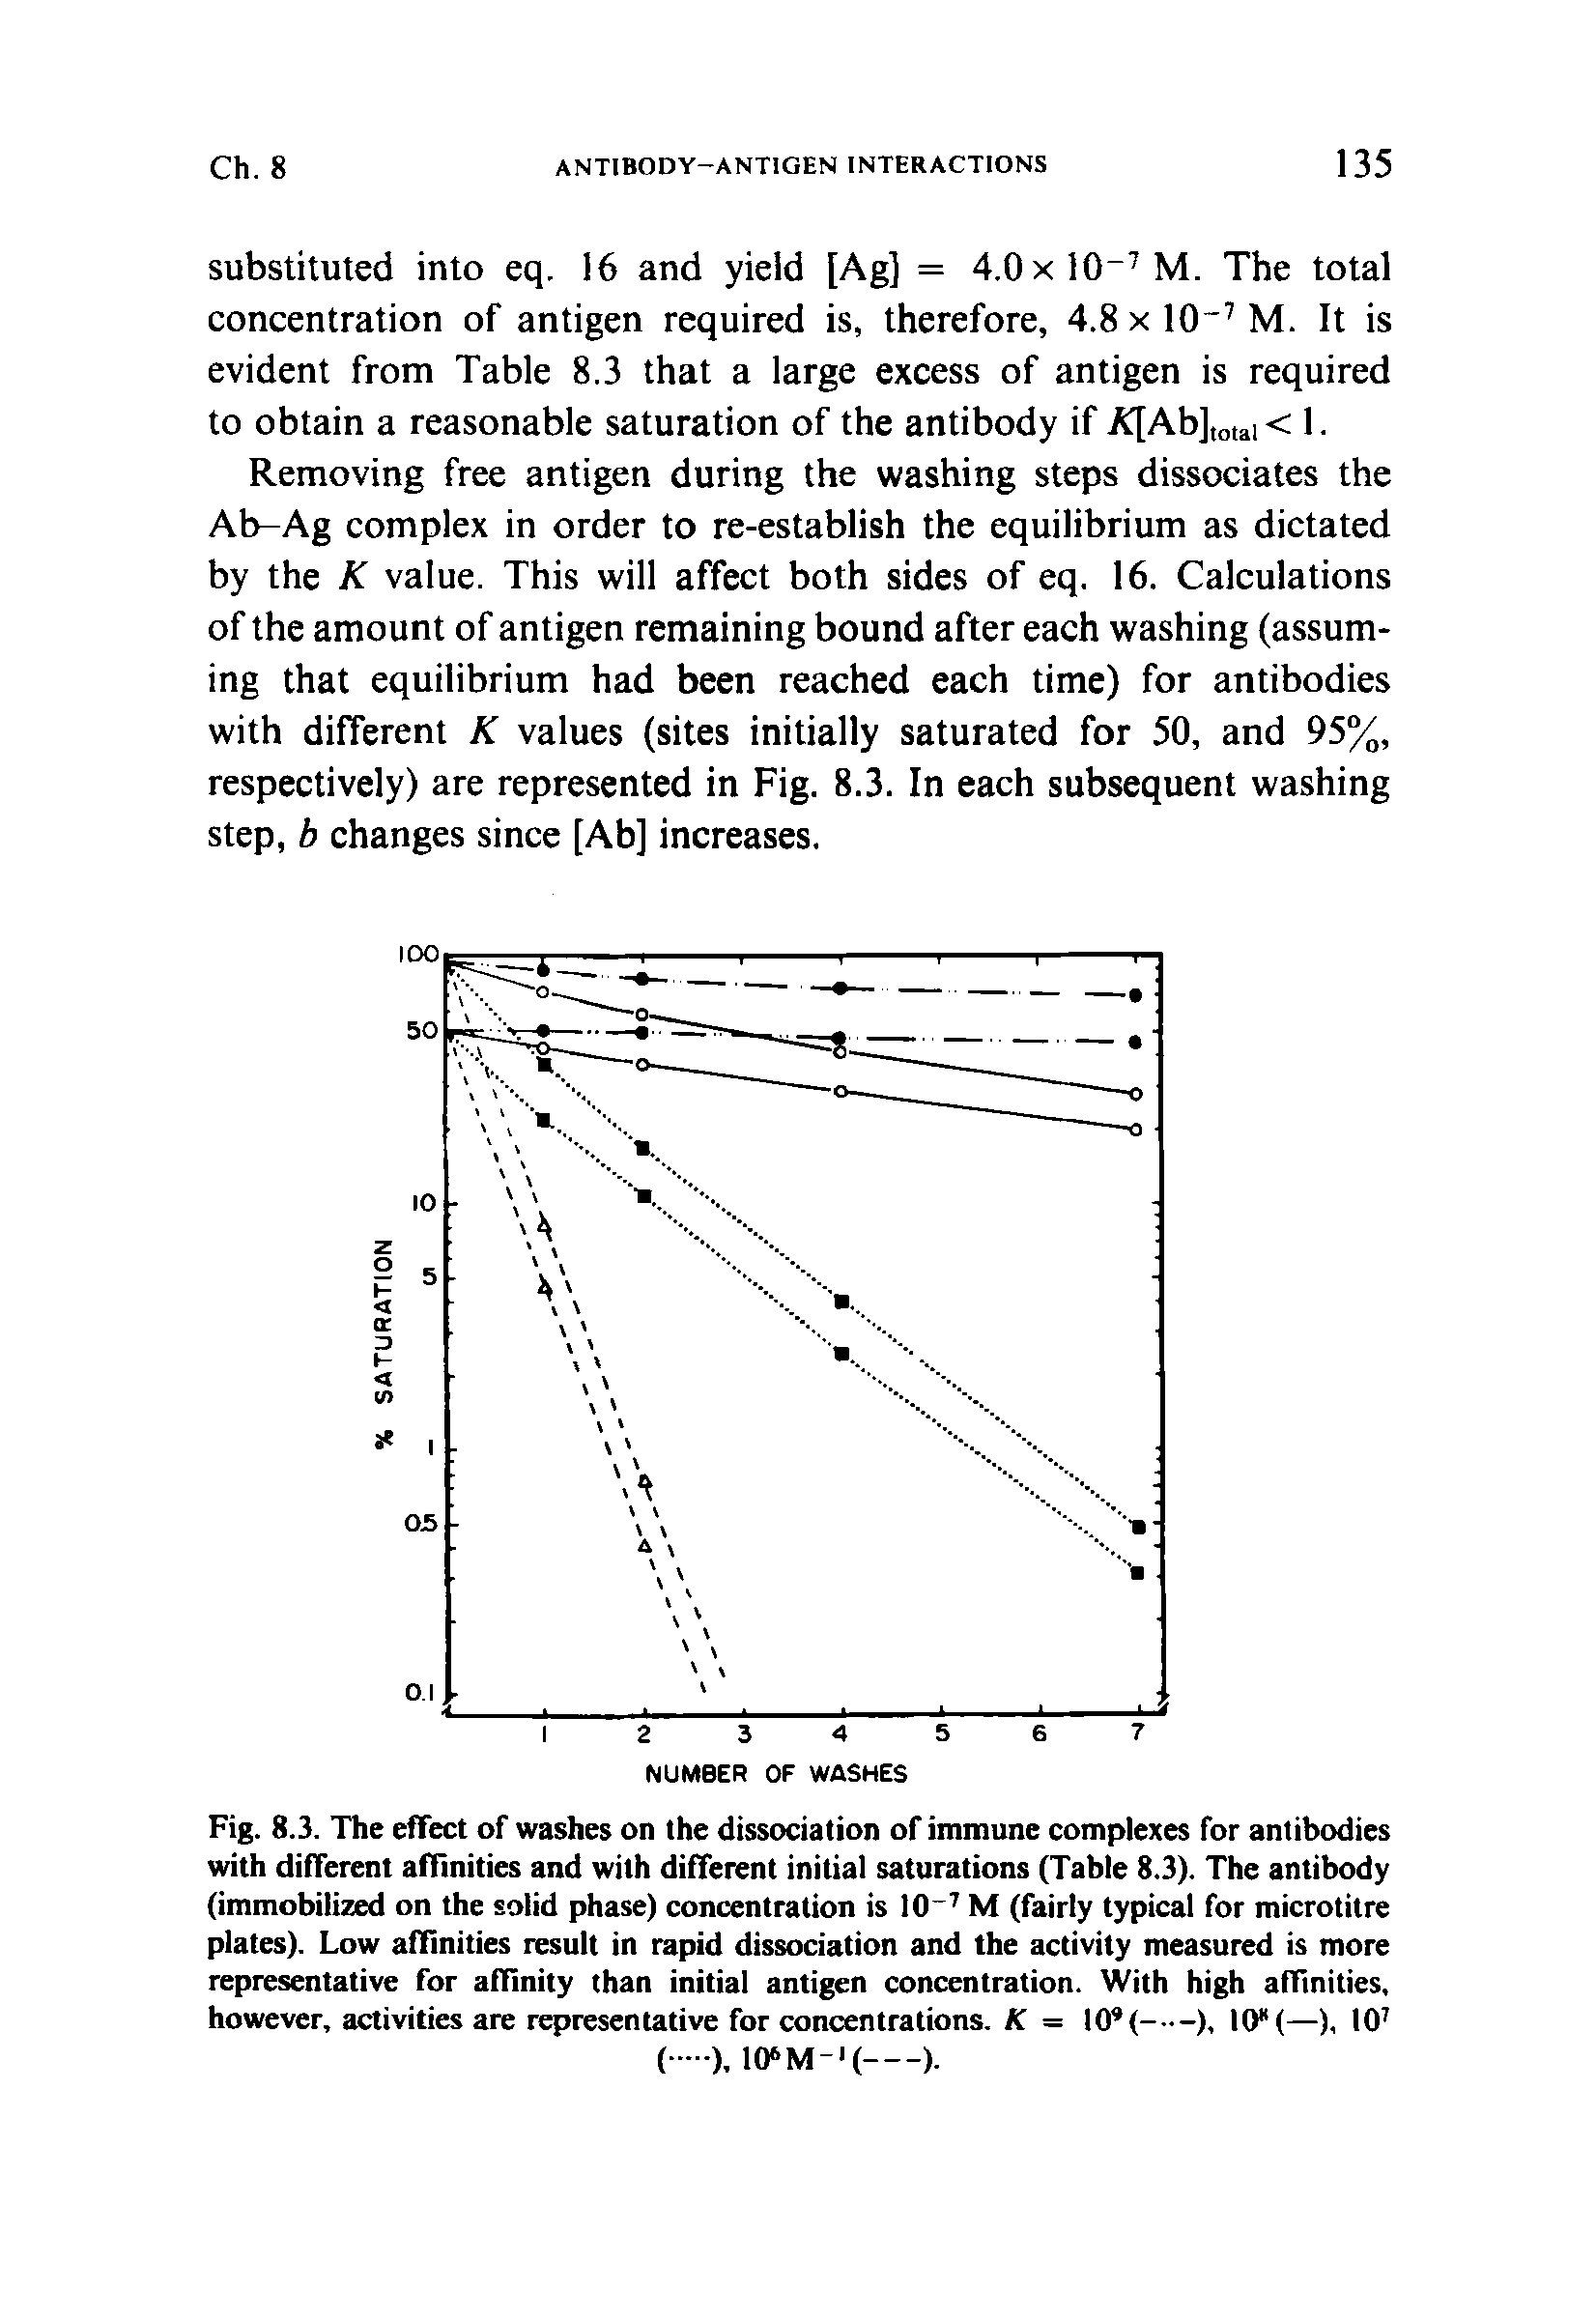 Fig. 8.3. The effect of washes on the dissociation of immune complexes for antibodies with different affinities and with different initial saturations (Table 8.3). The antibody (immobilized on the solid phase) concentration is 10 M (fairly typical for microtitre plates). Low affinities result in rapid dissociation and the activity measured is more representative for affinity than initial antigen concentration. With high affinities,...